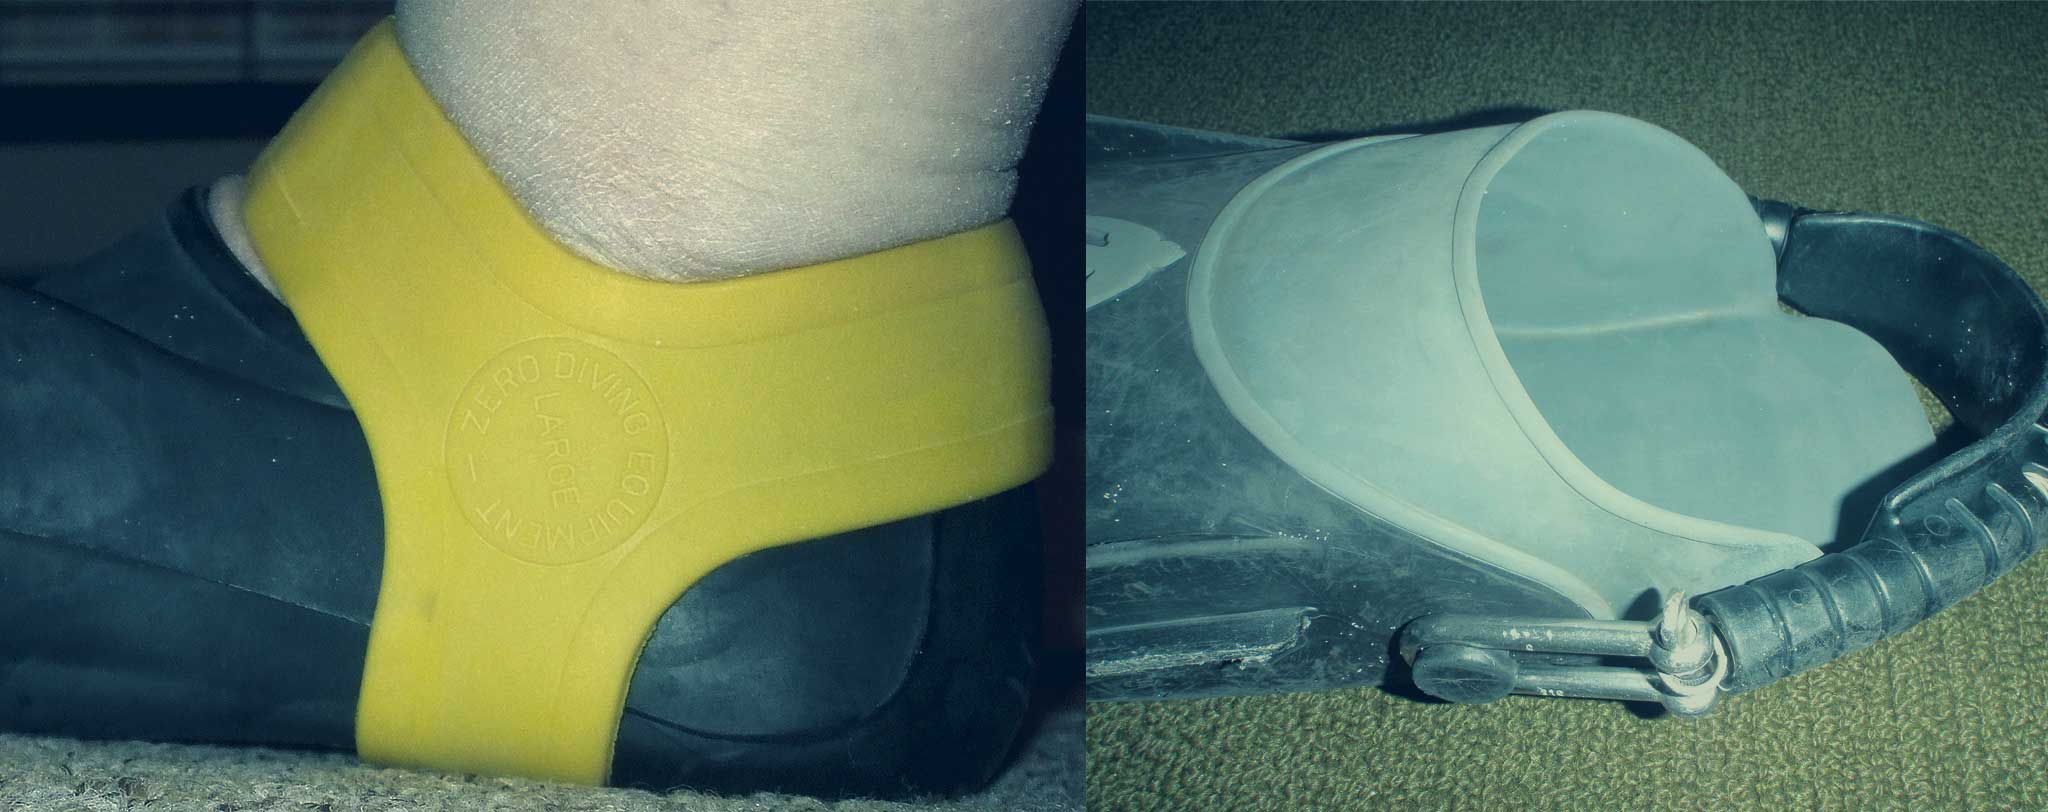 A full-foot fin worn barefoot with a fin grip for extra security. Right: An open-heel fin with a spring strap.